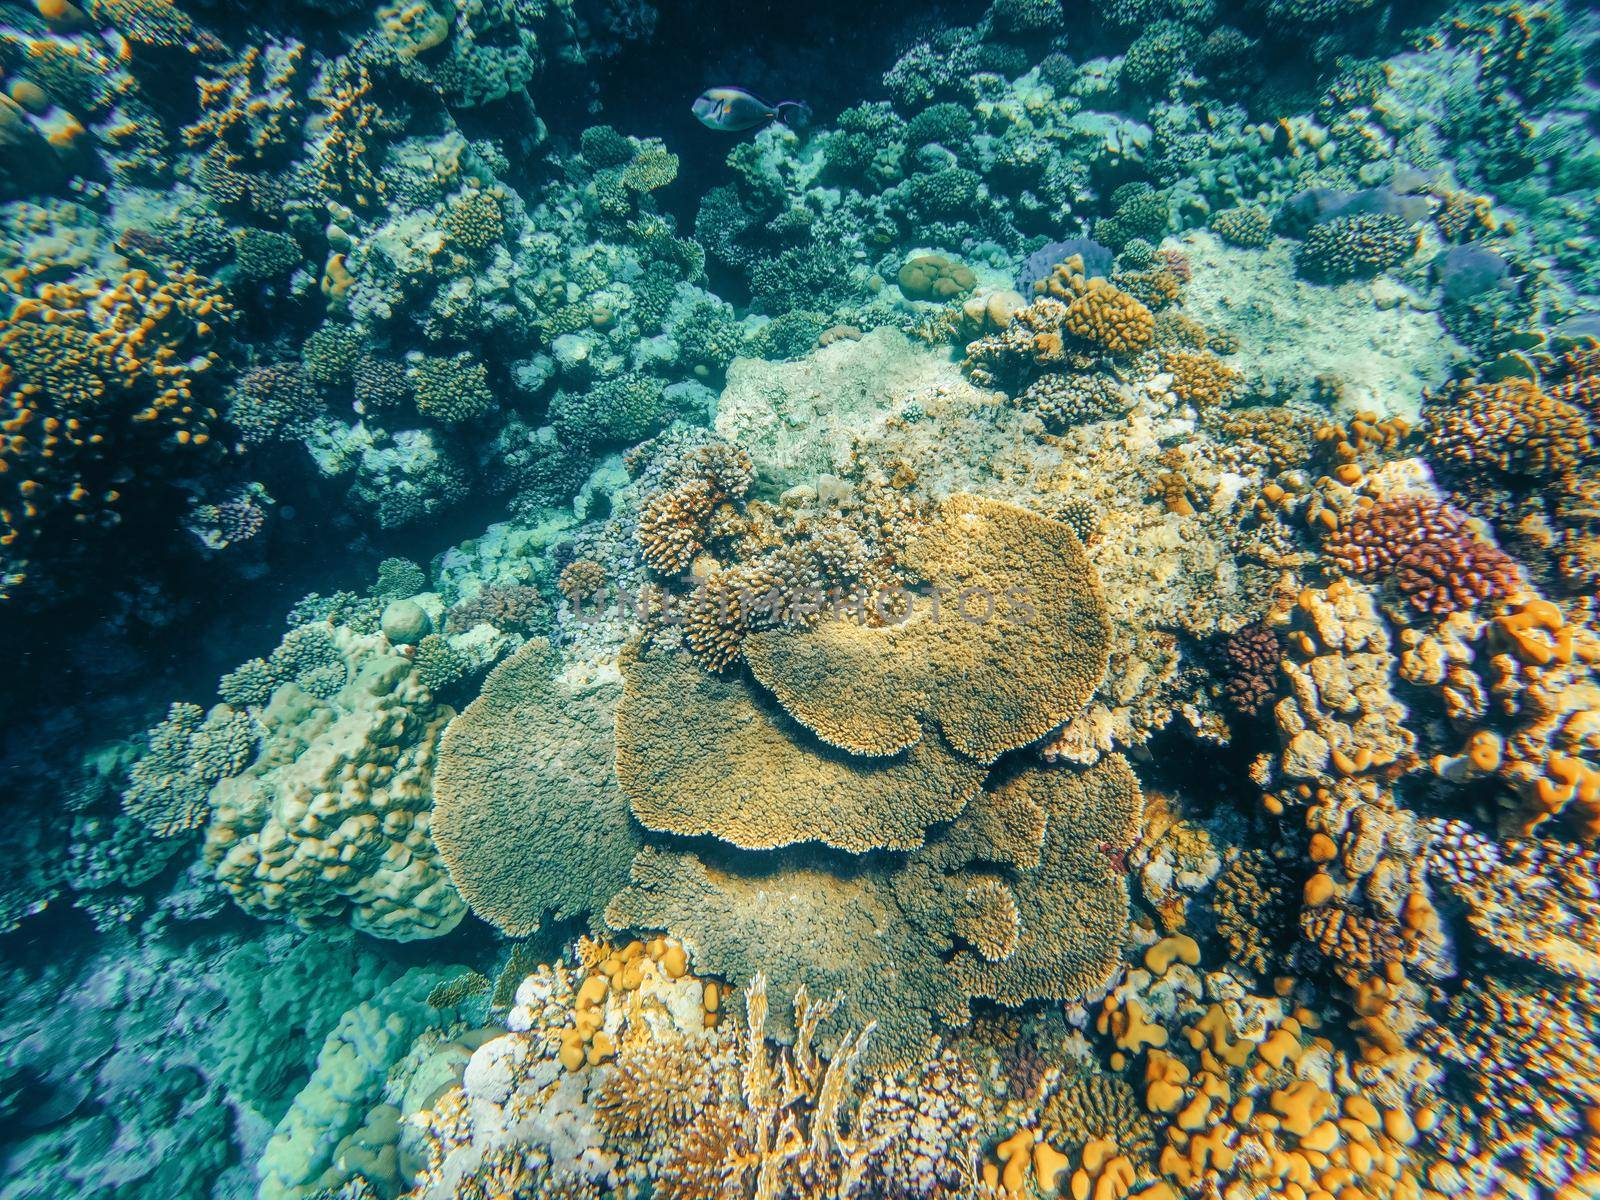 Coral reef garden in red sea, Marsa Alam Egypt by artush